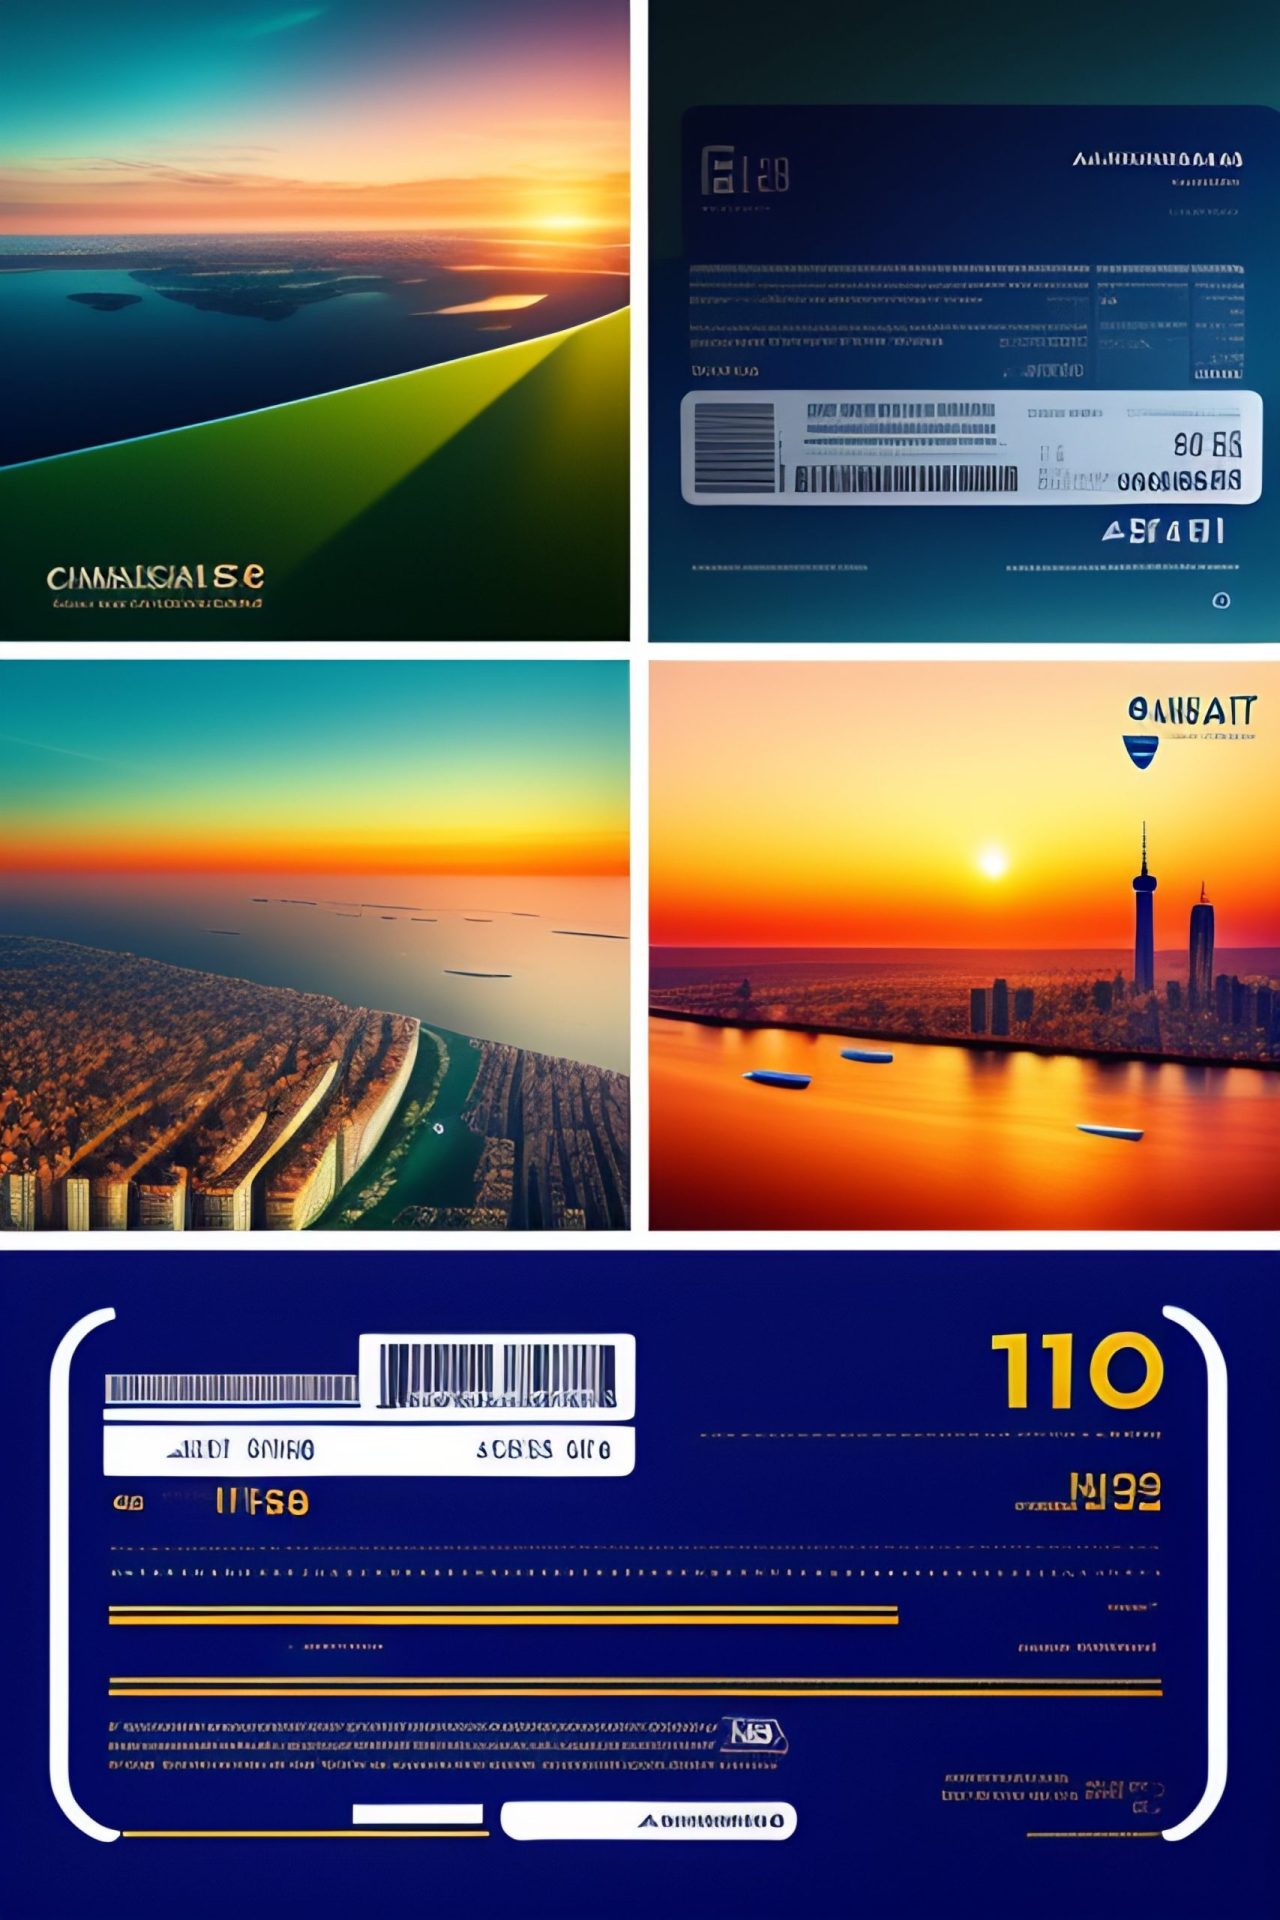 Credit Card Airline Companion Tickets & Passes